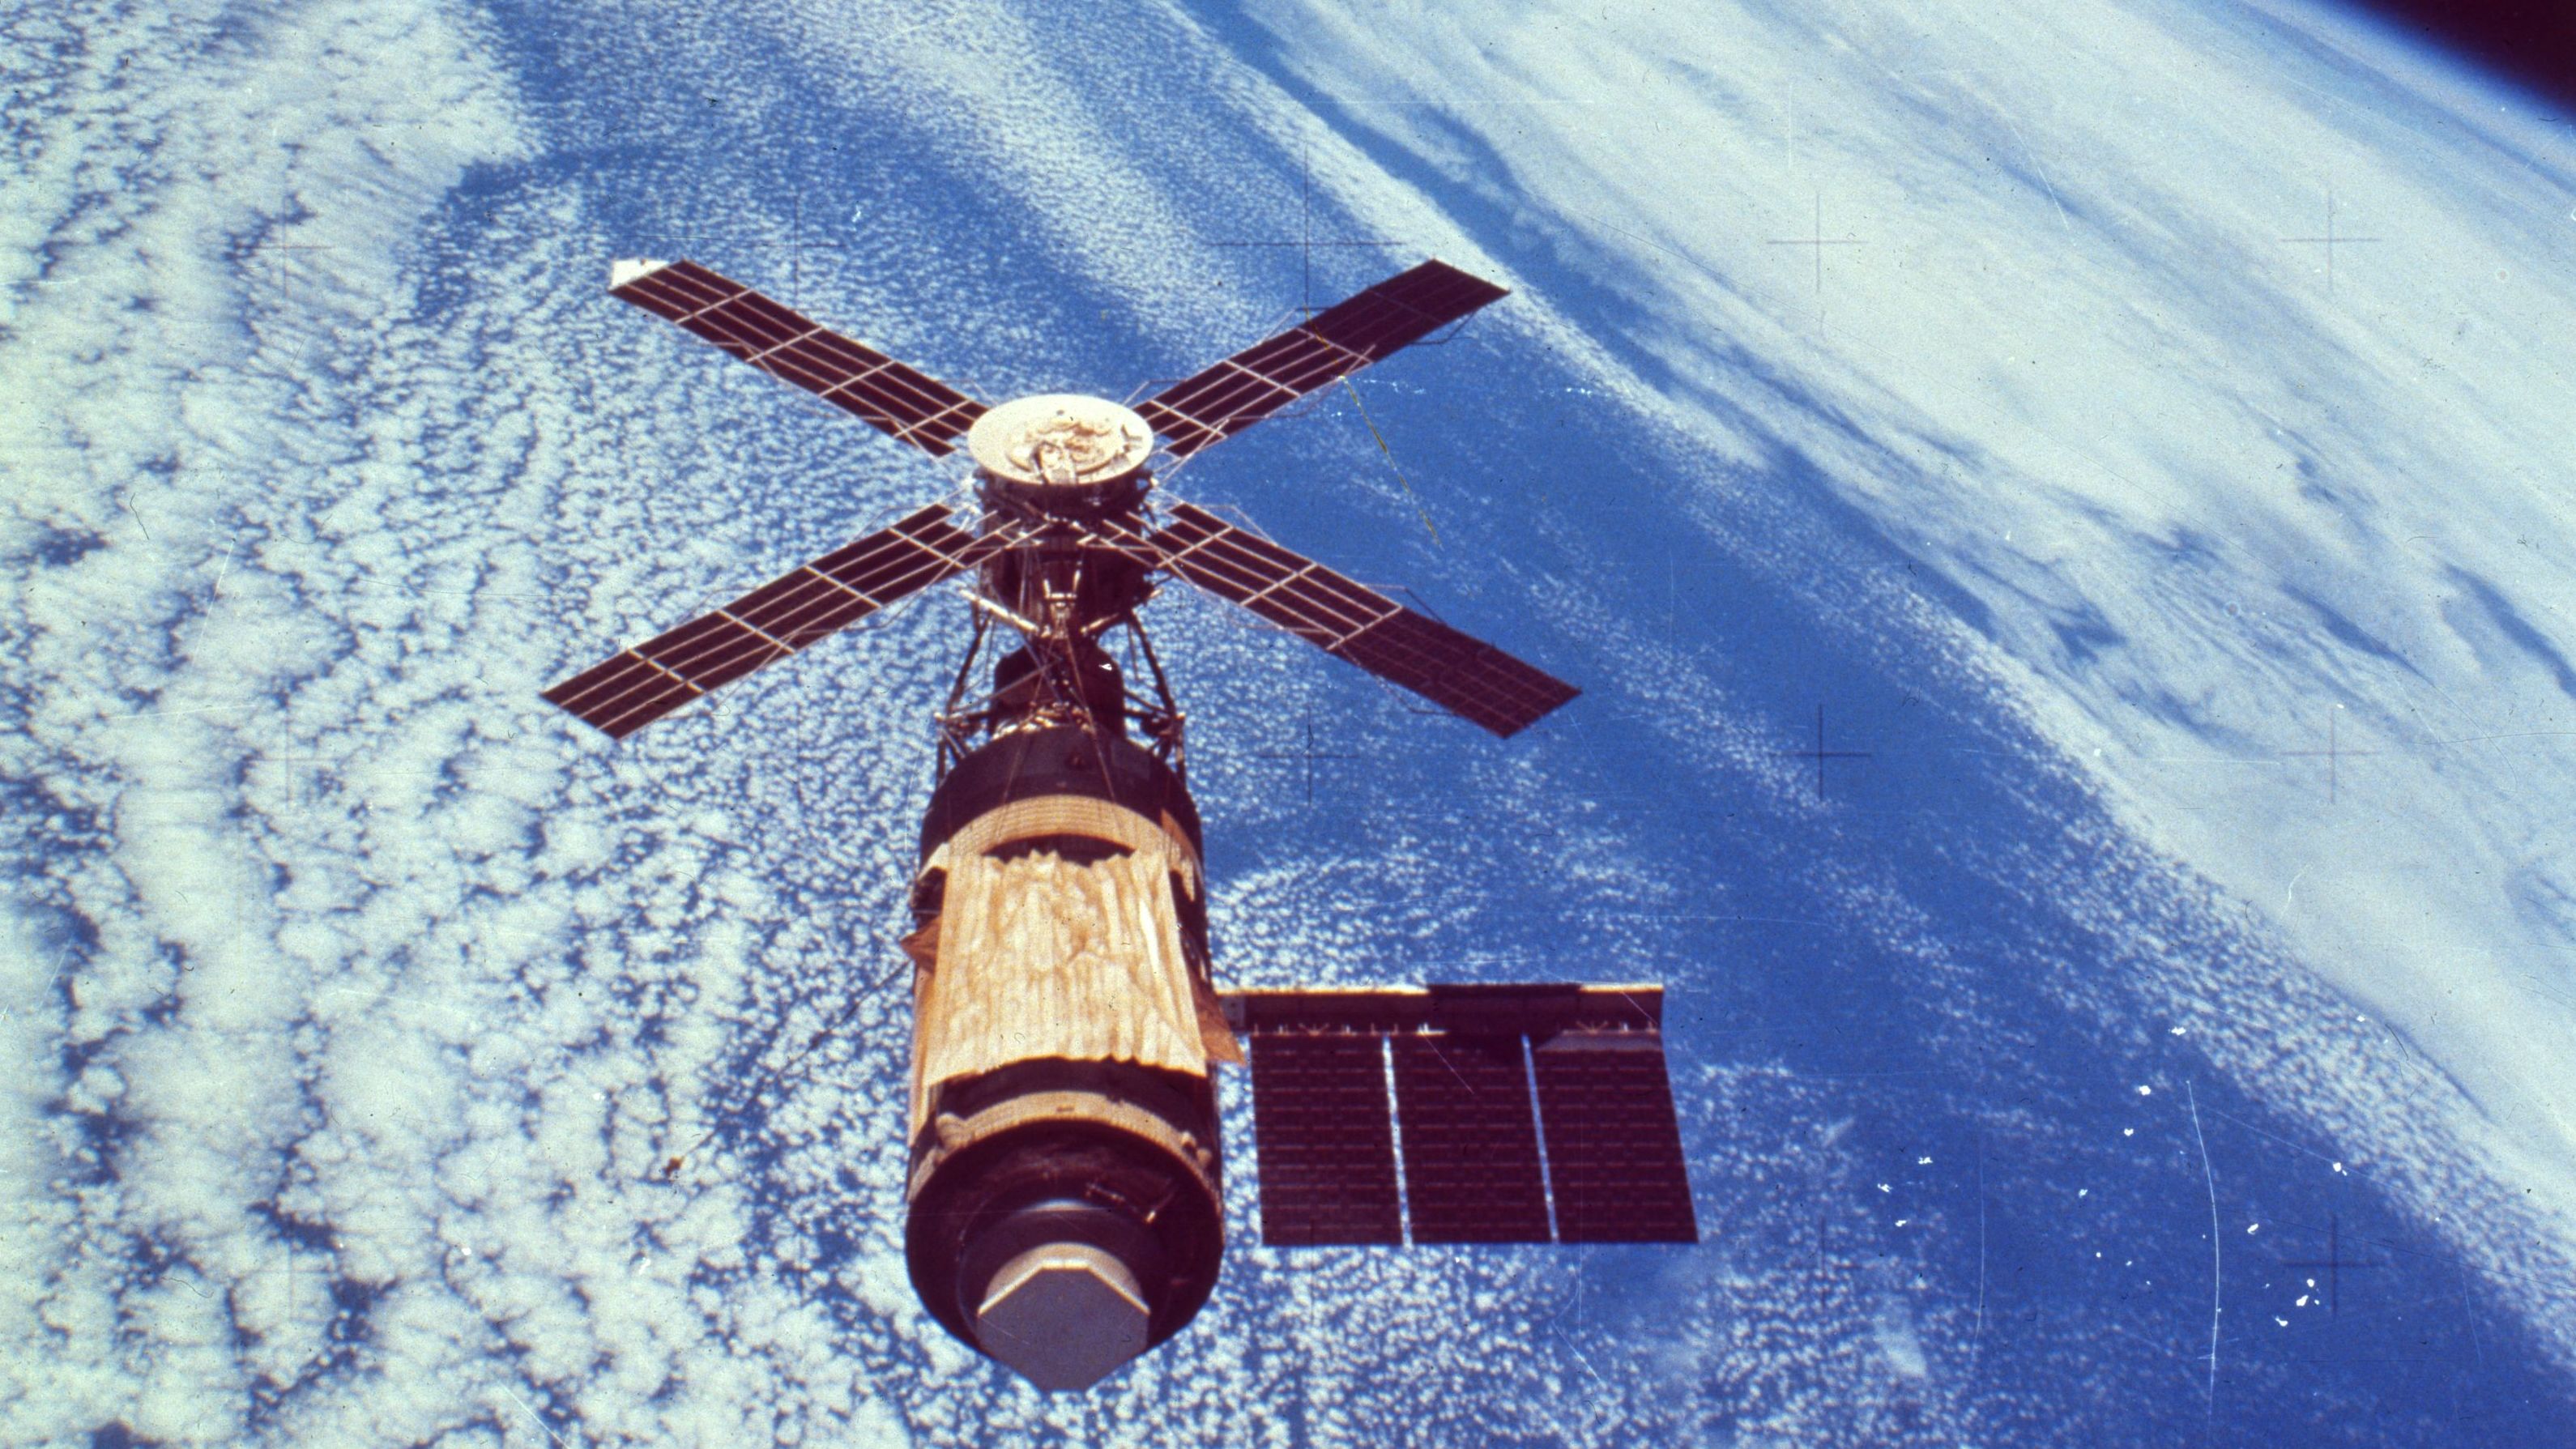 Skylab, the United States' first space station, orbited Earth from 1973 to 1979. The Soviet program had launched their first space station, Salyut, in 1971, and it stayed in space for 15 years.